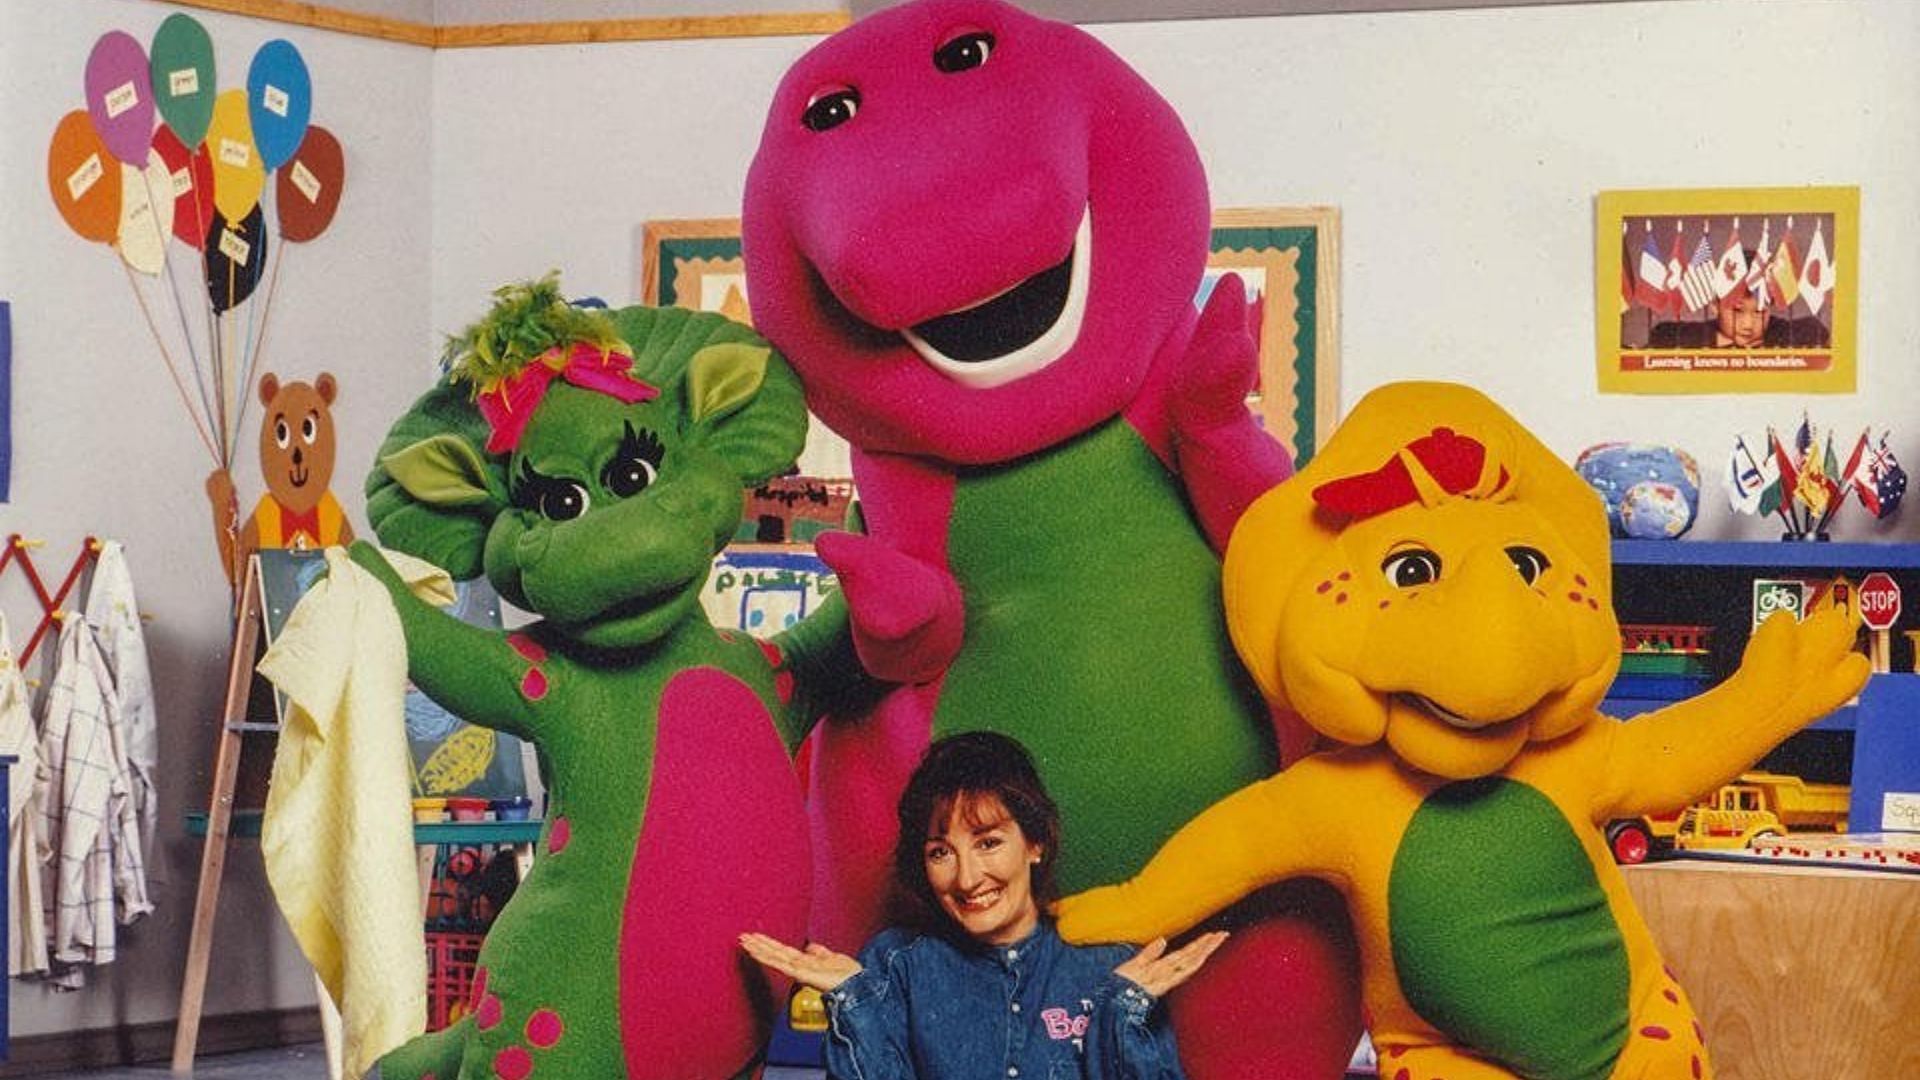 Barney the Dinosaur: 5 lesser-known facts